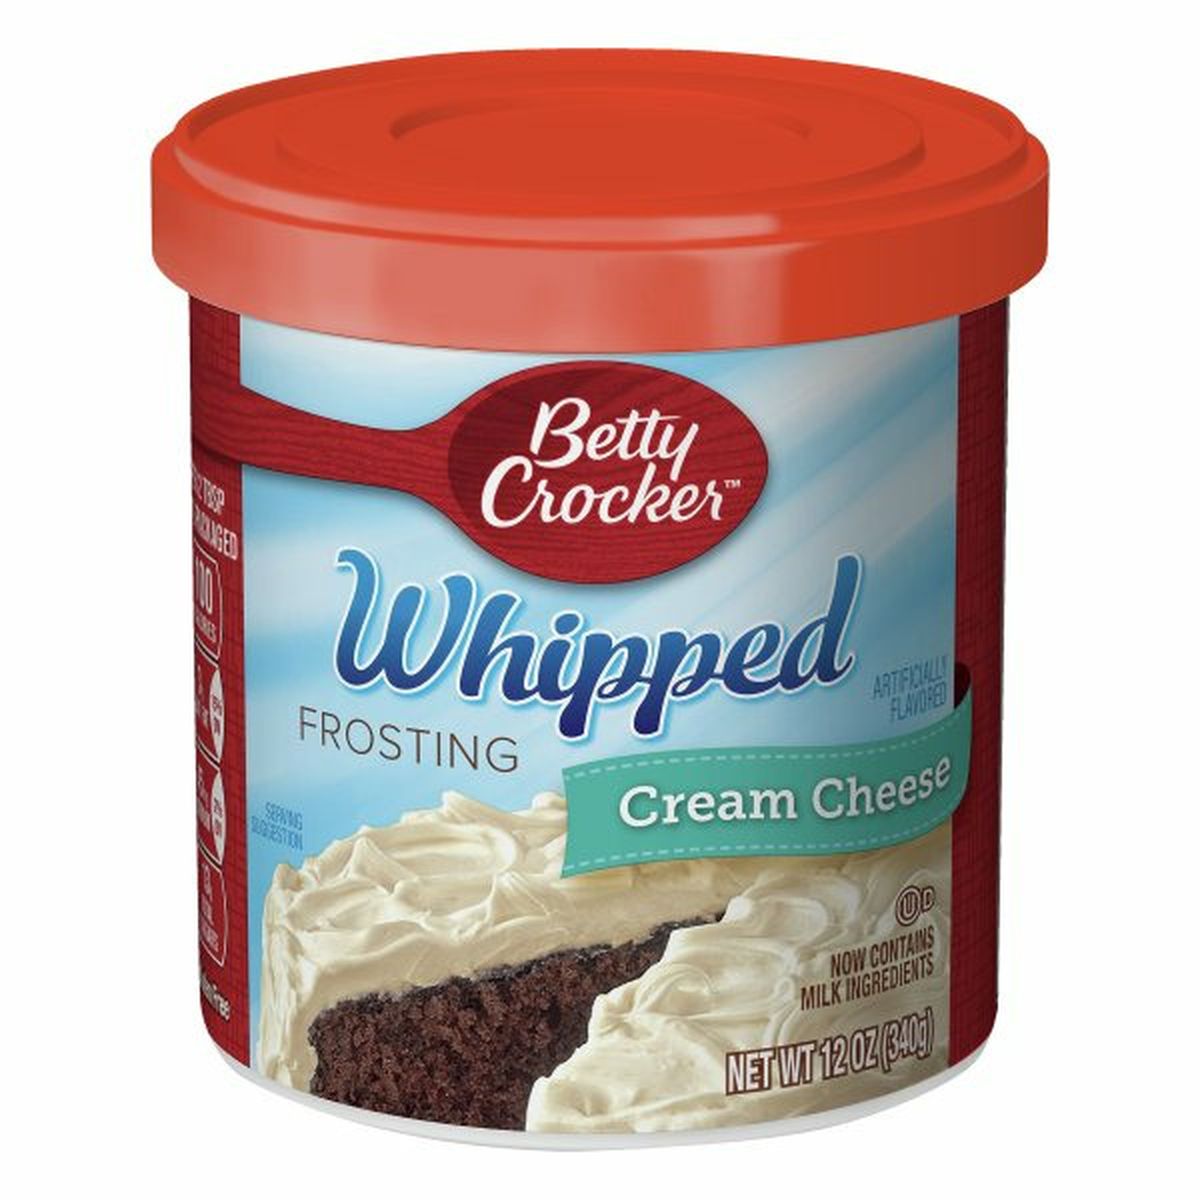 Calories in Betty Crocker Frosting, Cream Cheese, Whipped